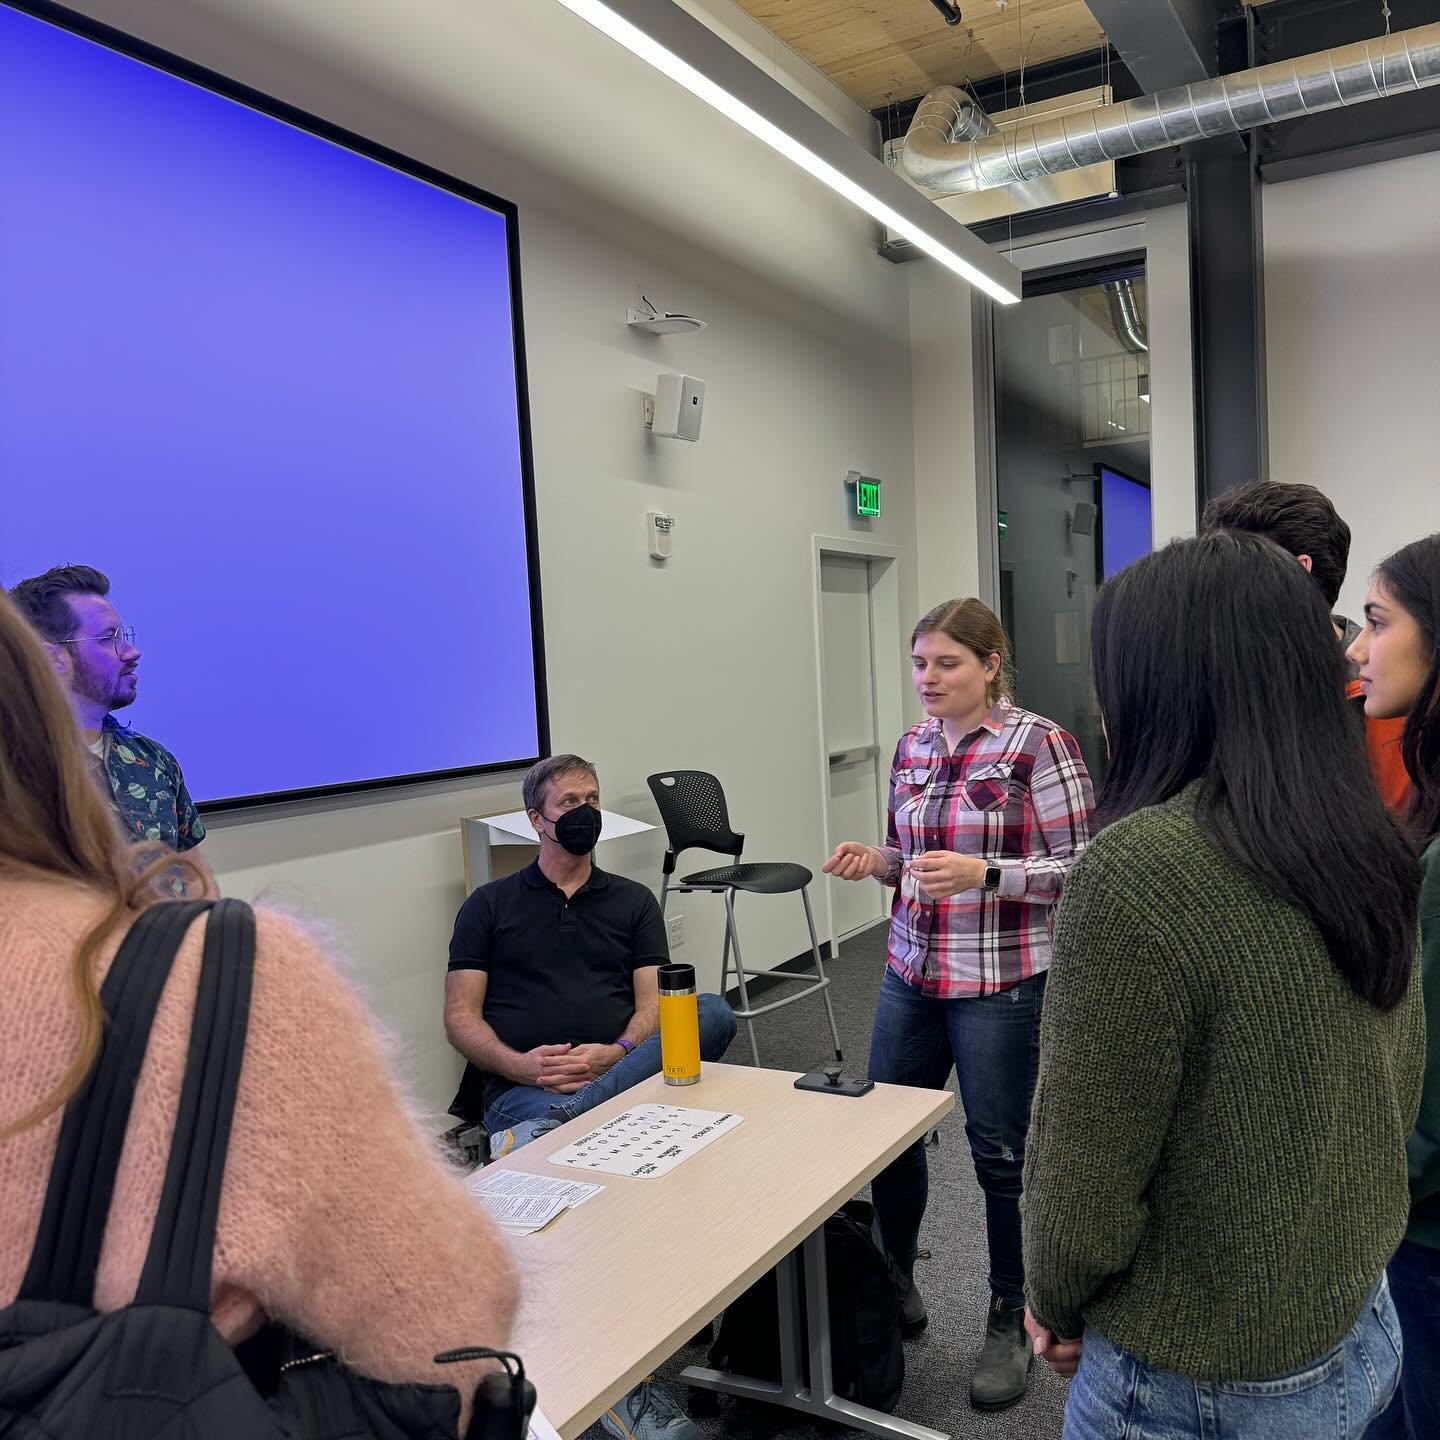 We recently had a design industry panel event featuring Mark Harniss from UW Rehabilitation Medicine and Brennen Johnston from WATAP. We learned about the accessible design and assistive technology fields as well as what it is like to have a career i